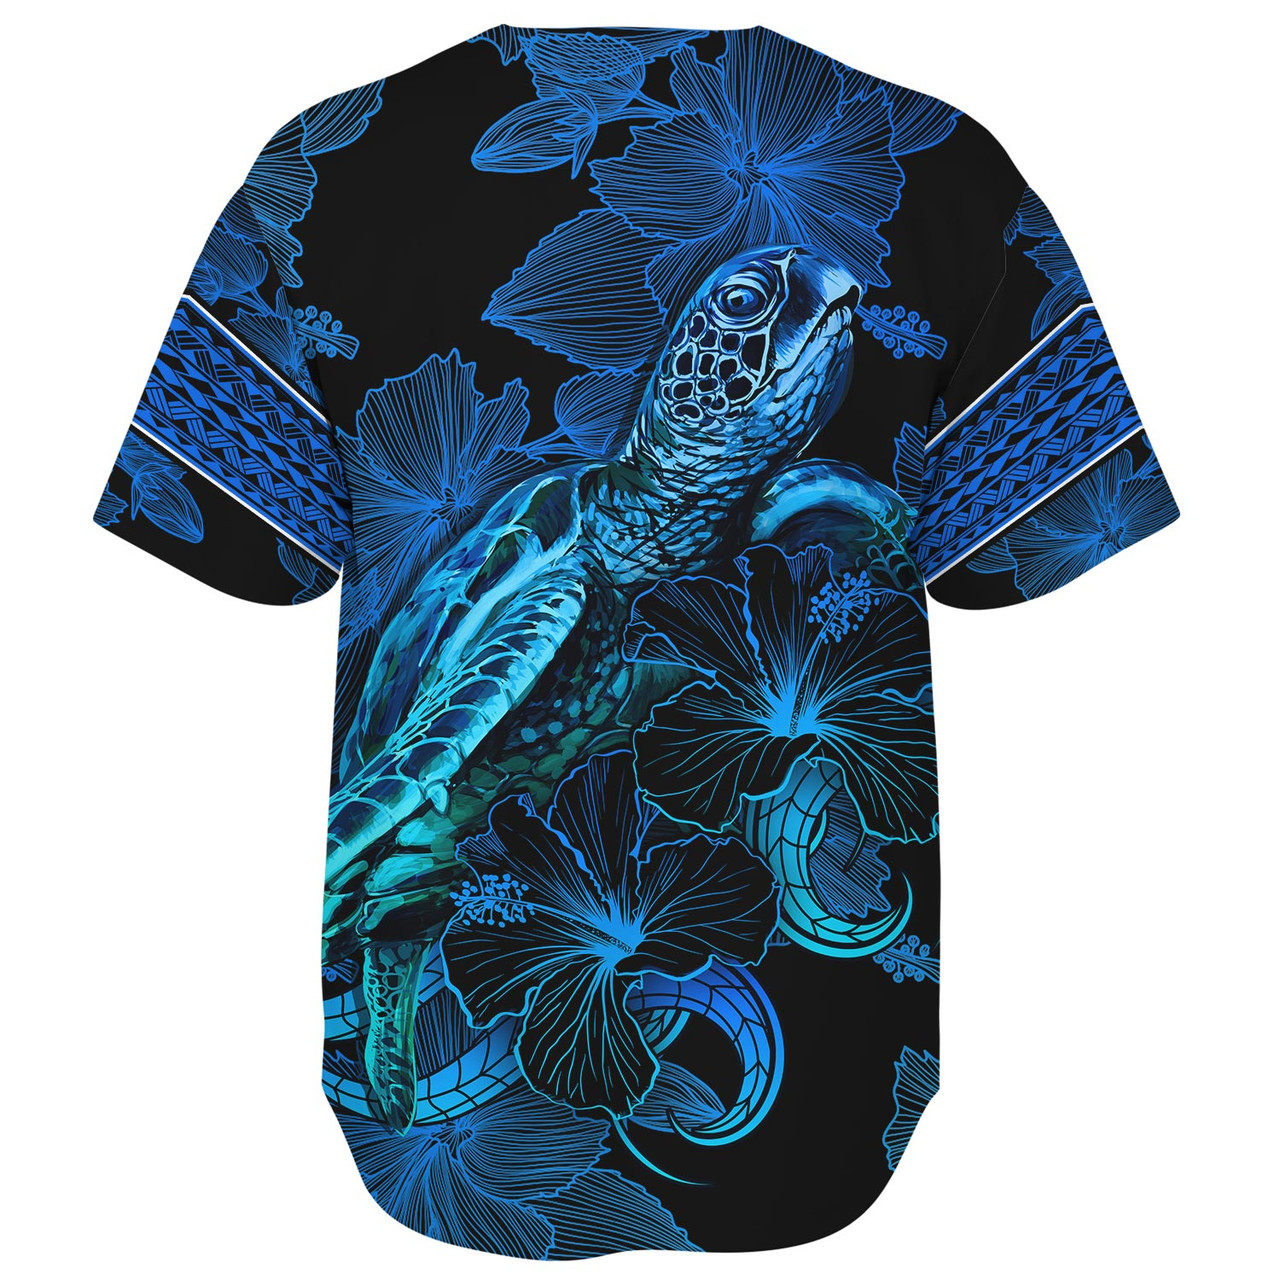 New Zealand Baseball Shirt Sea Turtle With Blooming Hibiscus Flowers Tribal Blue